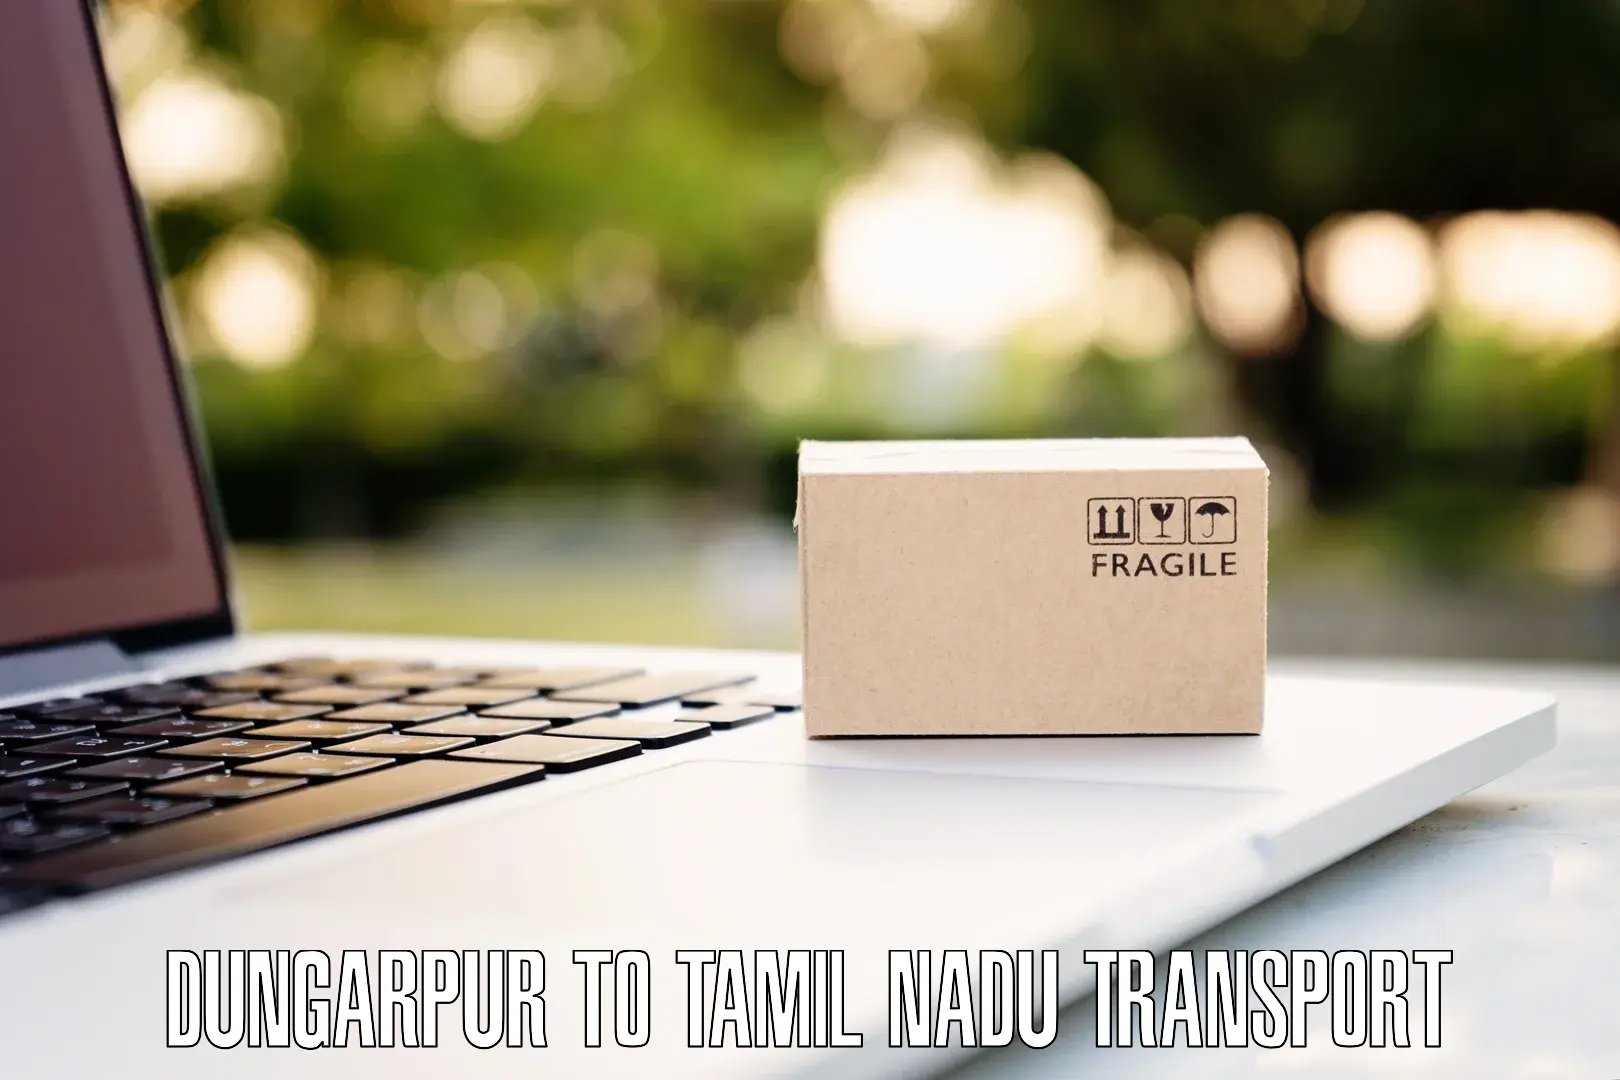 Transportation solution services Dungarpur to Ennore Port Chennai